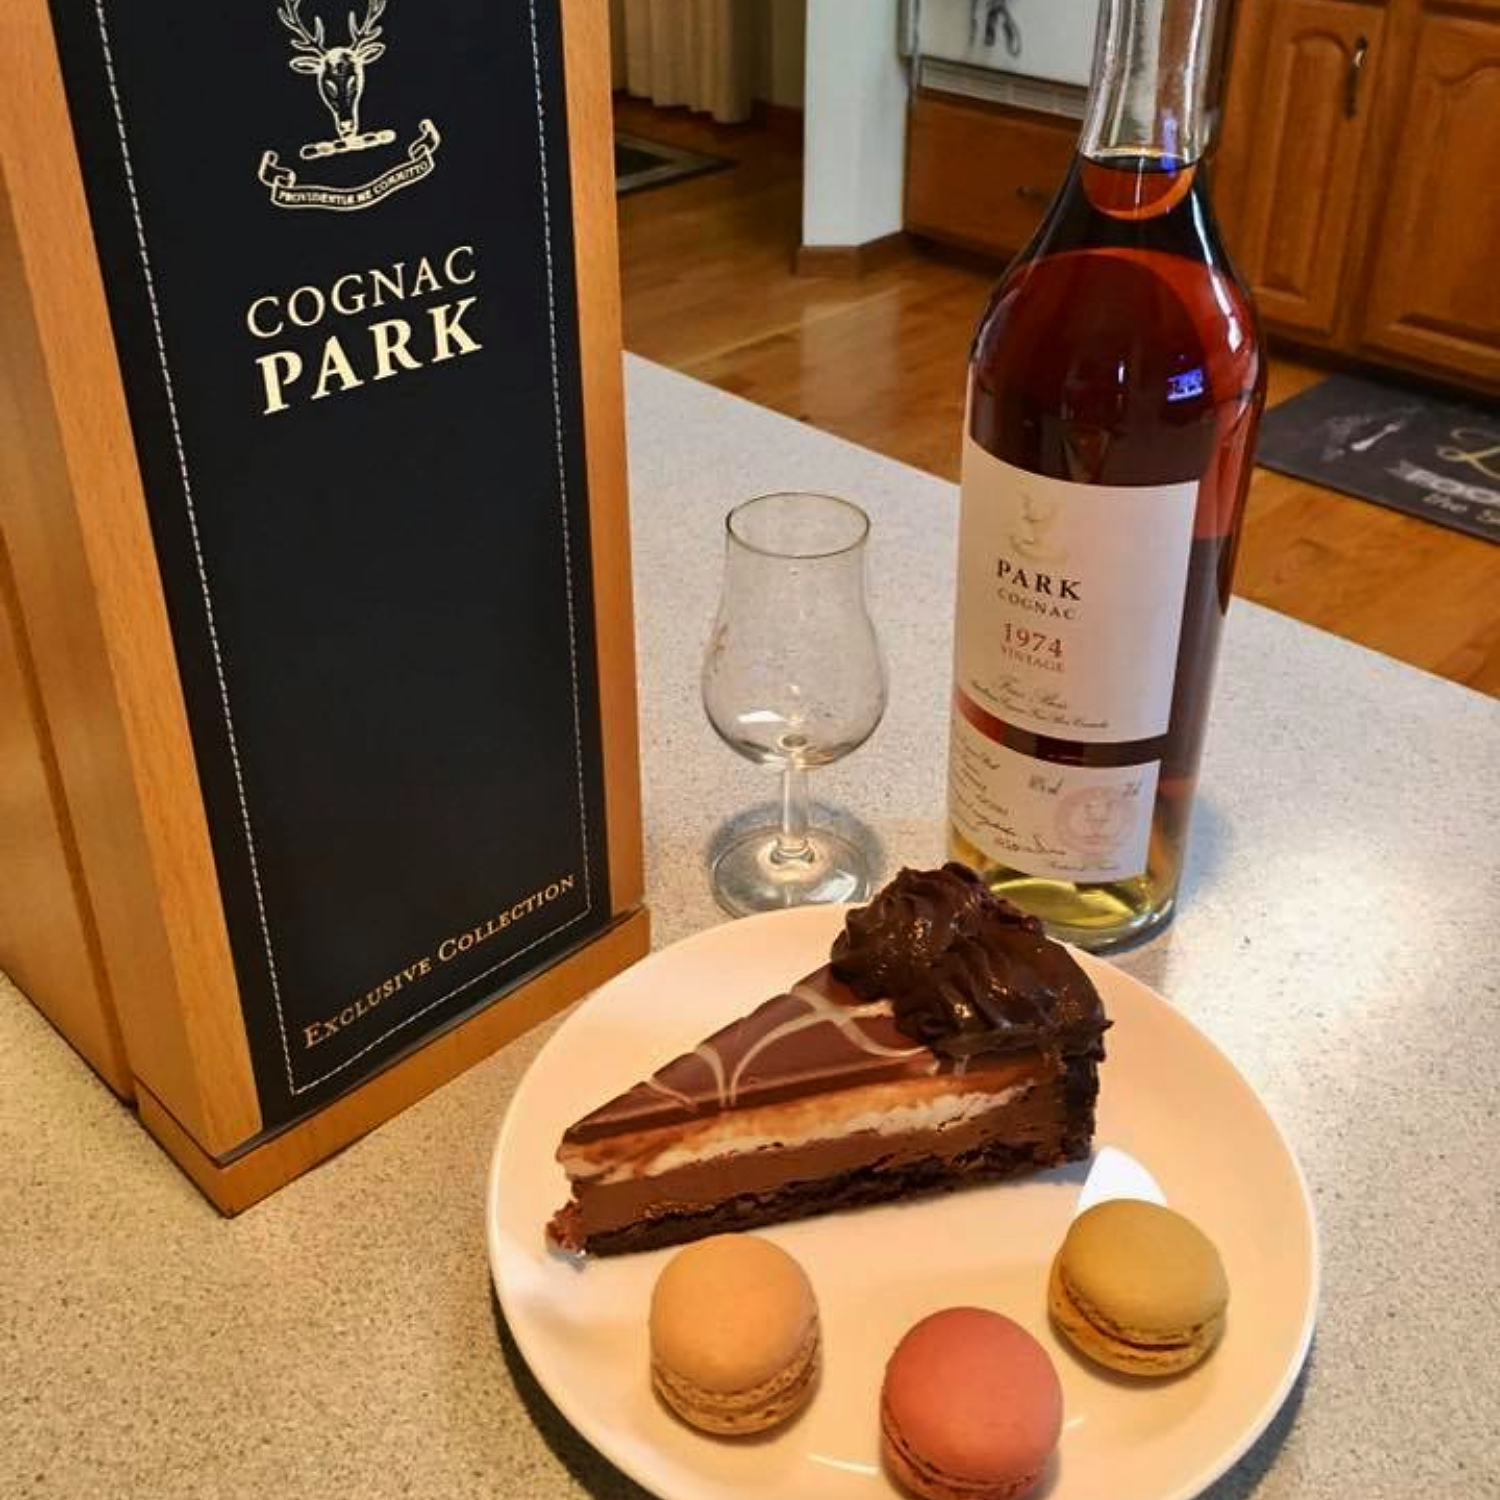 A bottle of Park 1974 paired with cake and macarons